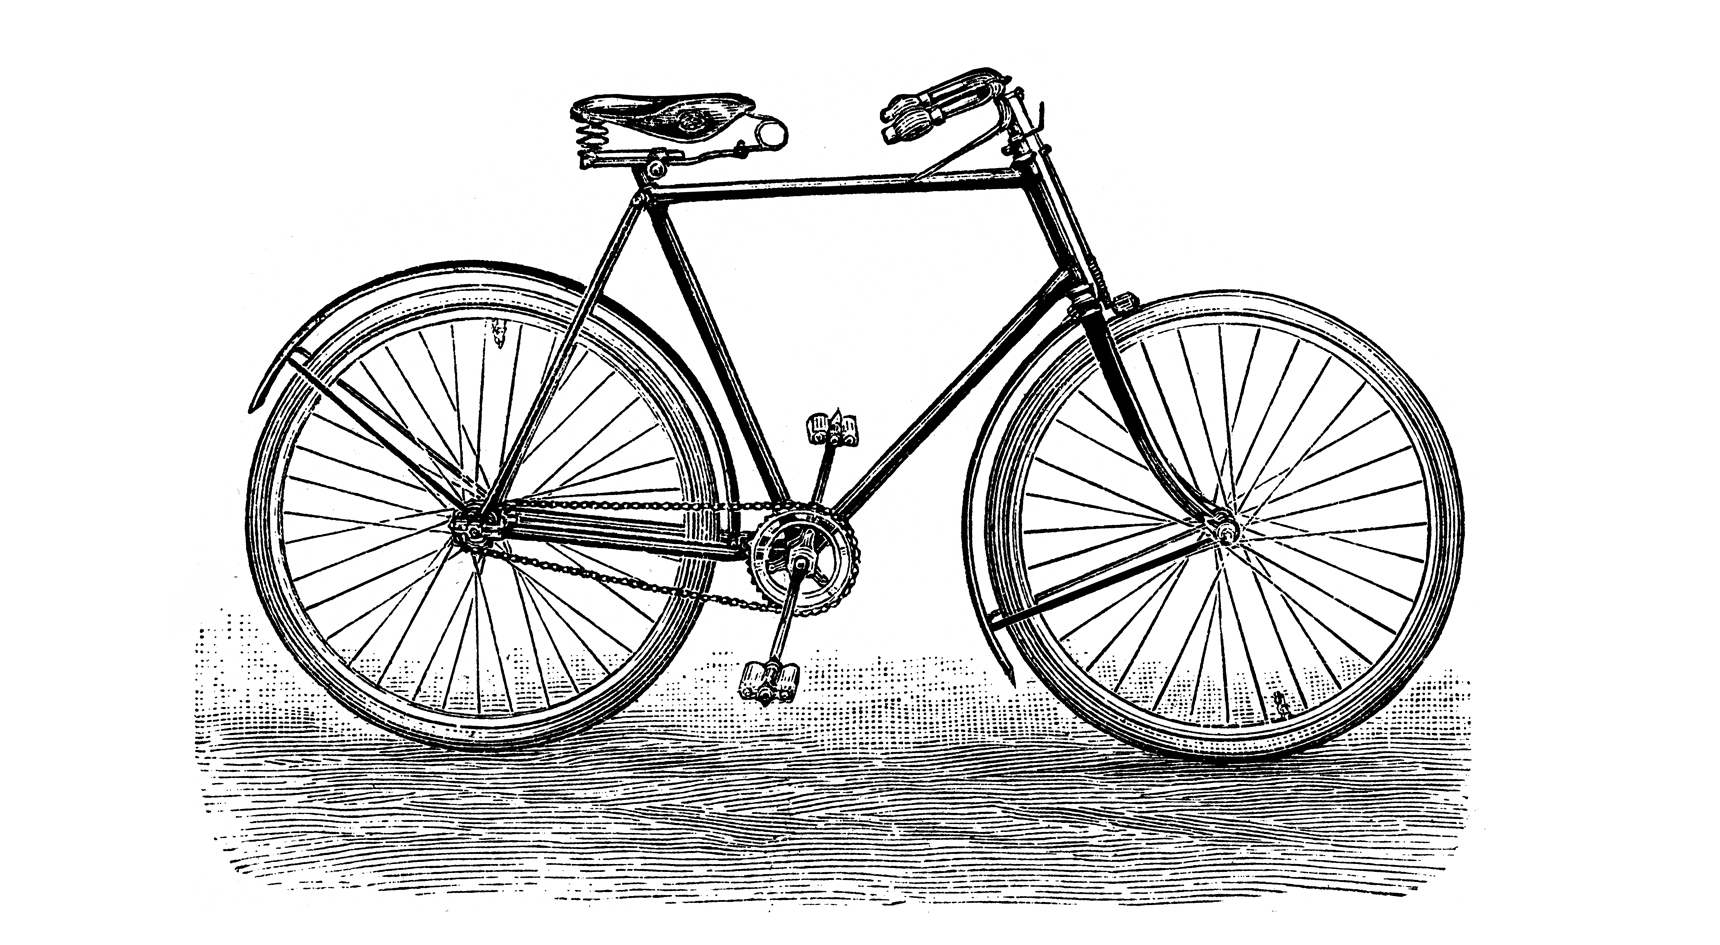 A illustration of a Rover safety bicycle